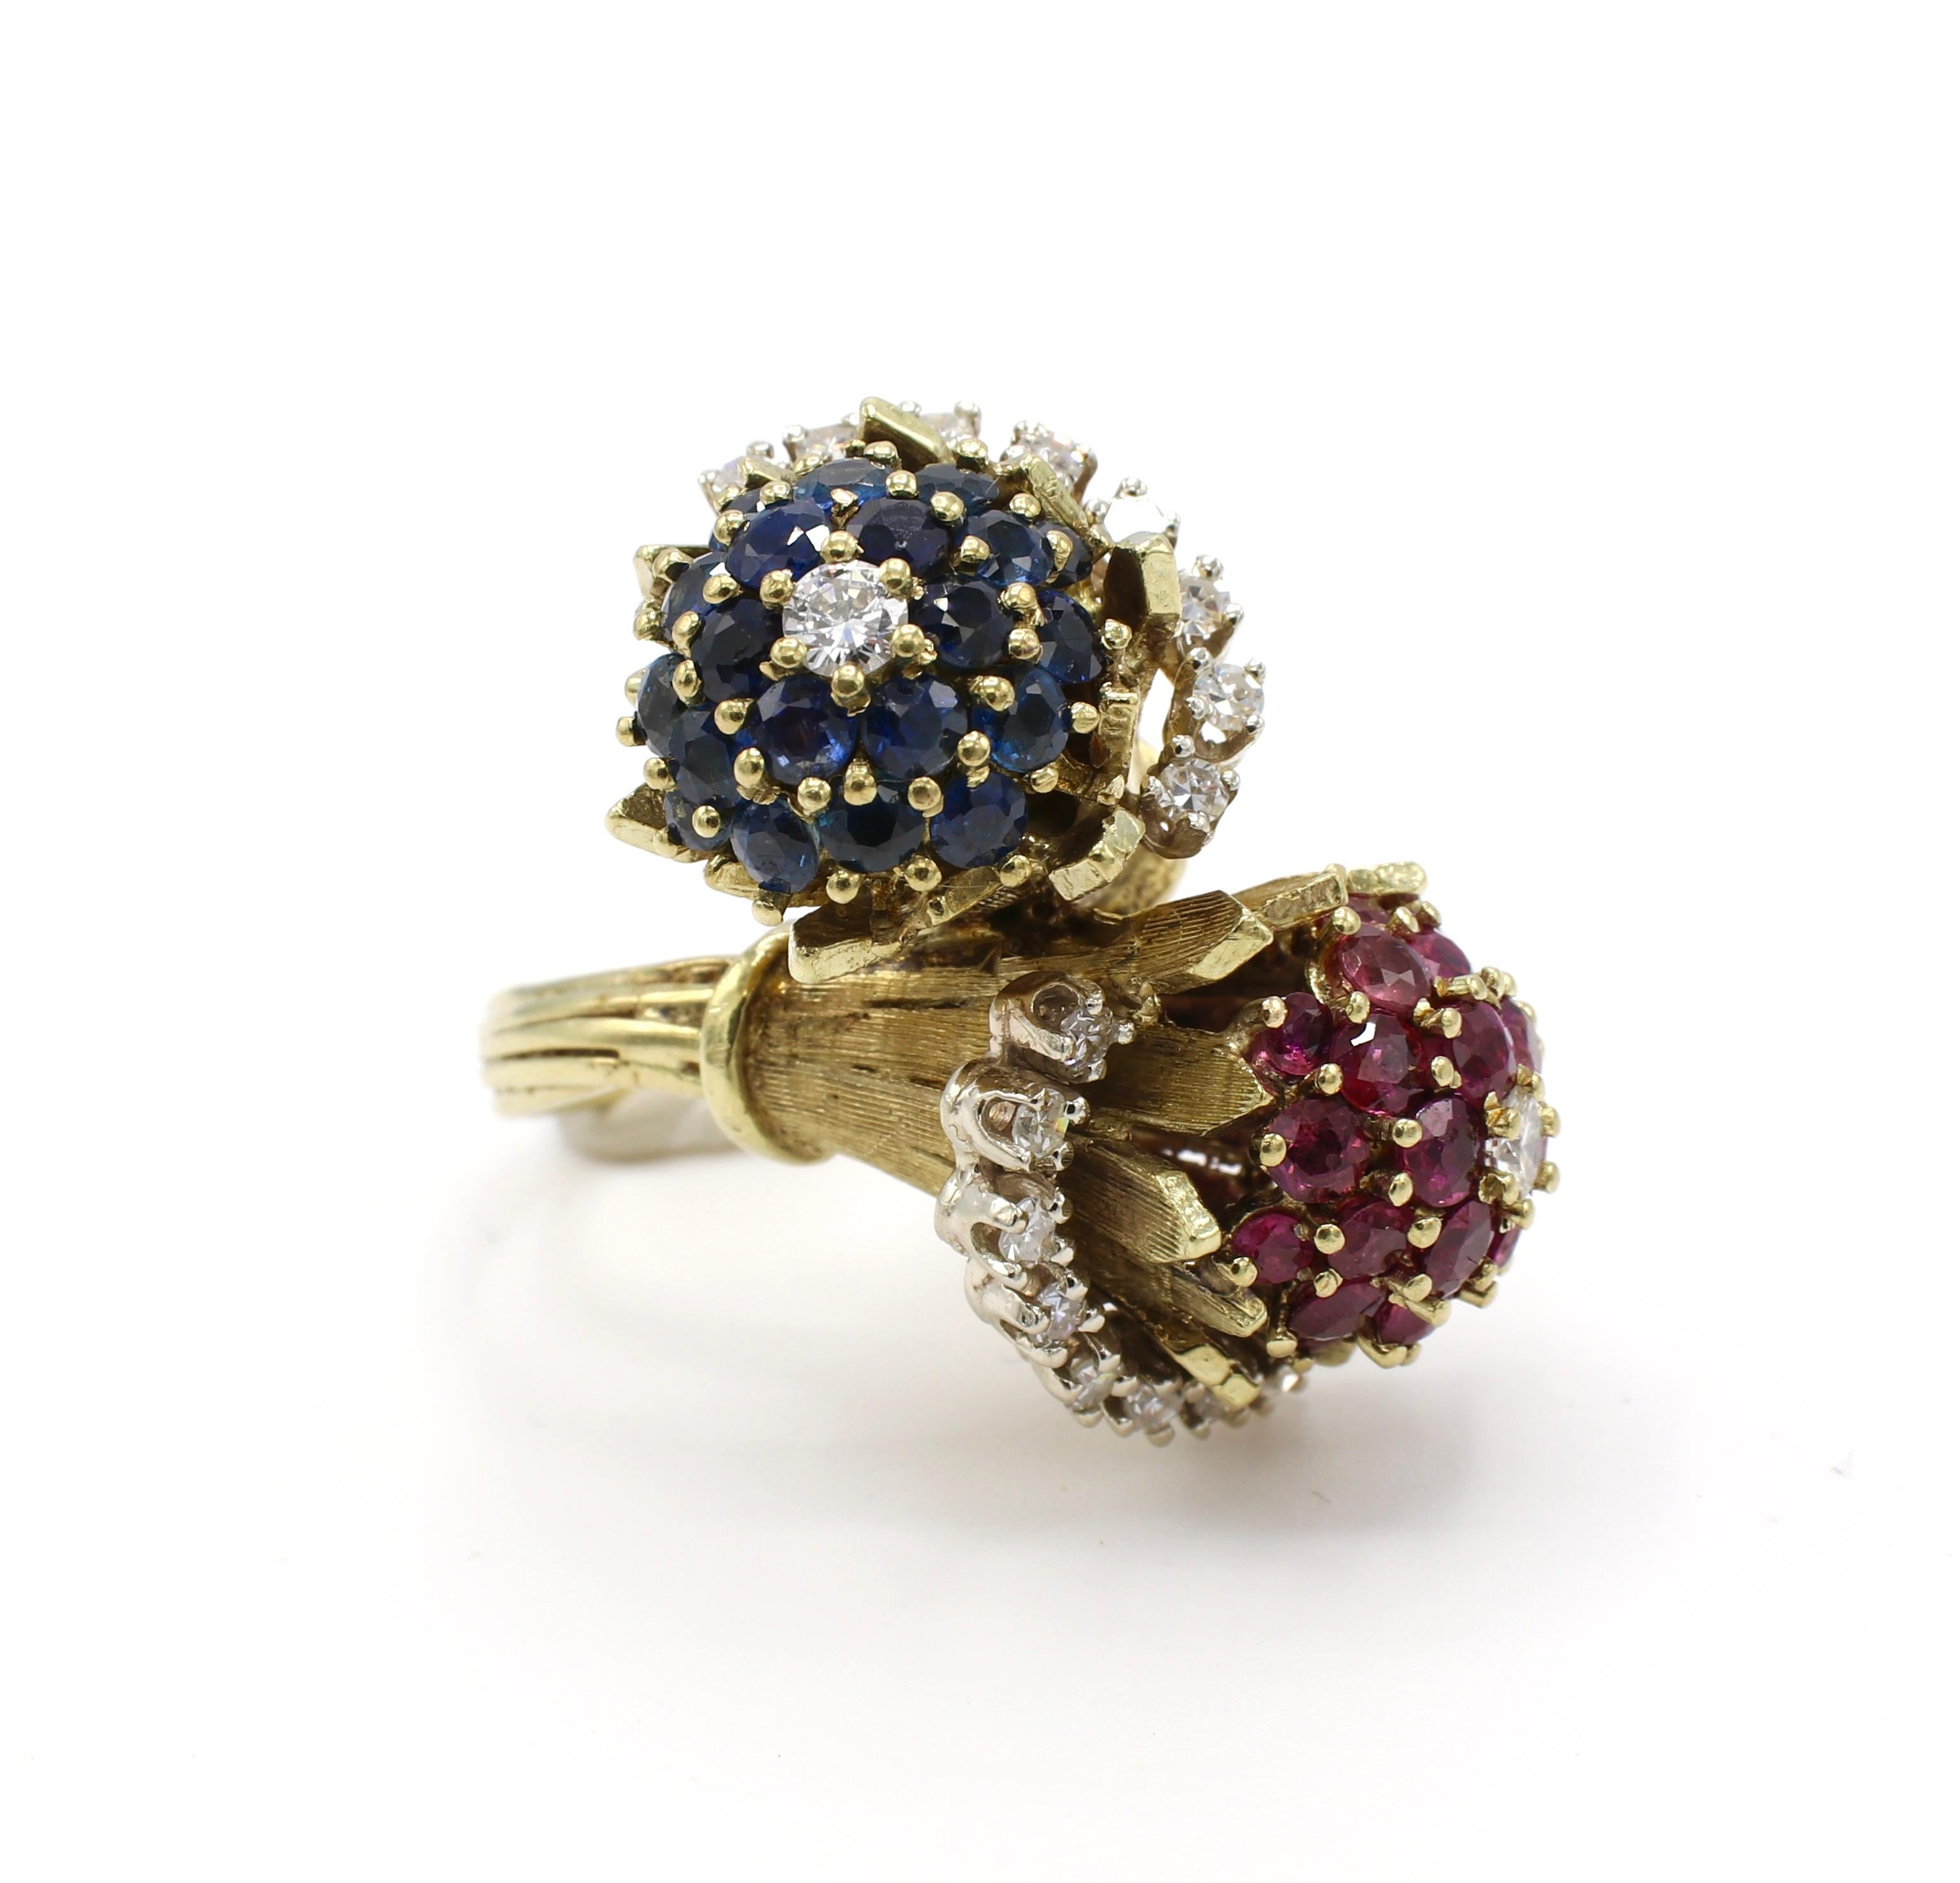 14 Karat Yellow Gold Diamond, Ruby & Sapphire Bypass Ring Size 7

Metal: 14 karat yellow gold
Weight: 19.53 grams
Diamonds: Approx. .75 CTW G-H VS-SI
Top of ring measures approx. 31mm x 18mm 
Band is 3.3mm at base
Size: 7 (US)
